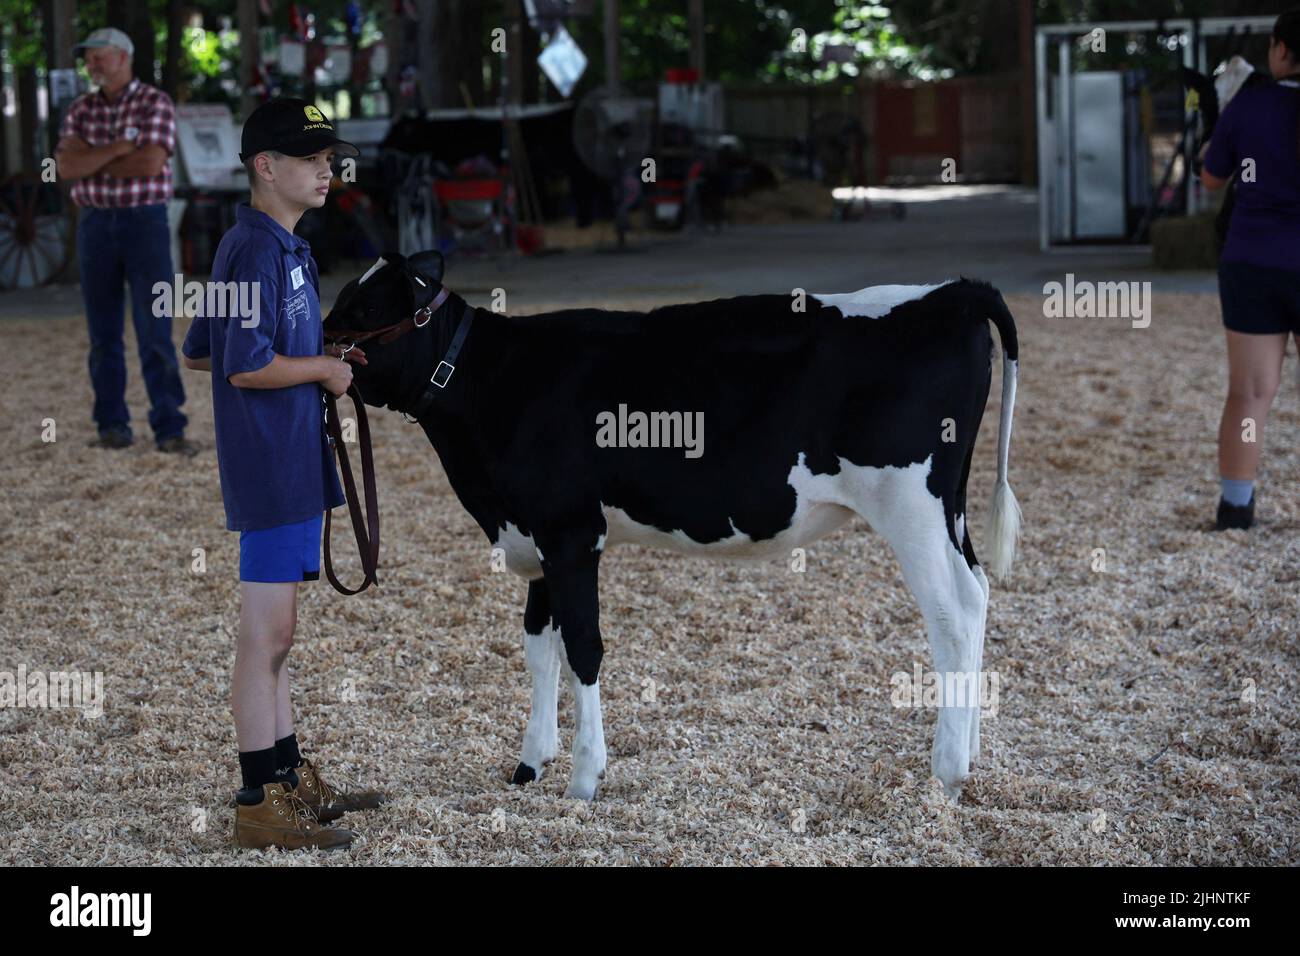 A boy stands with a cow during practice for a livestock competition at the 2022 Saratoga County Fair in Ballston Spa, New York, U.S., July 19, 2022. REUTERS/Shannon Stapleton Stock Photo